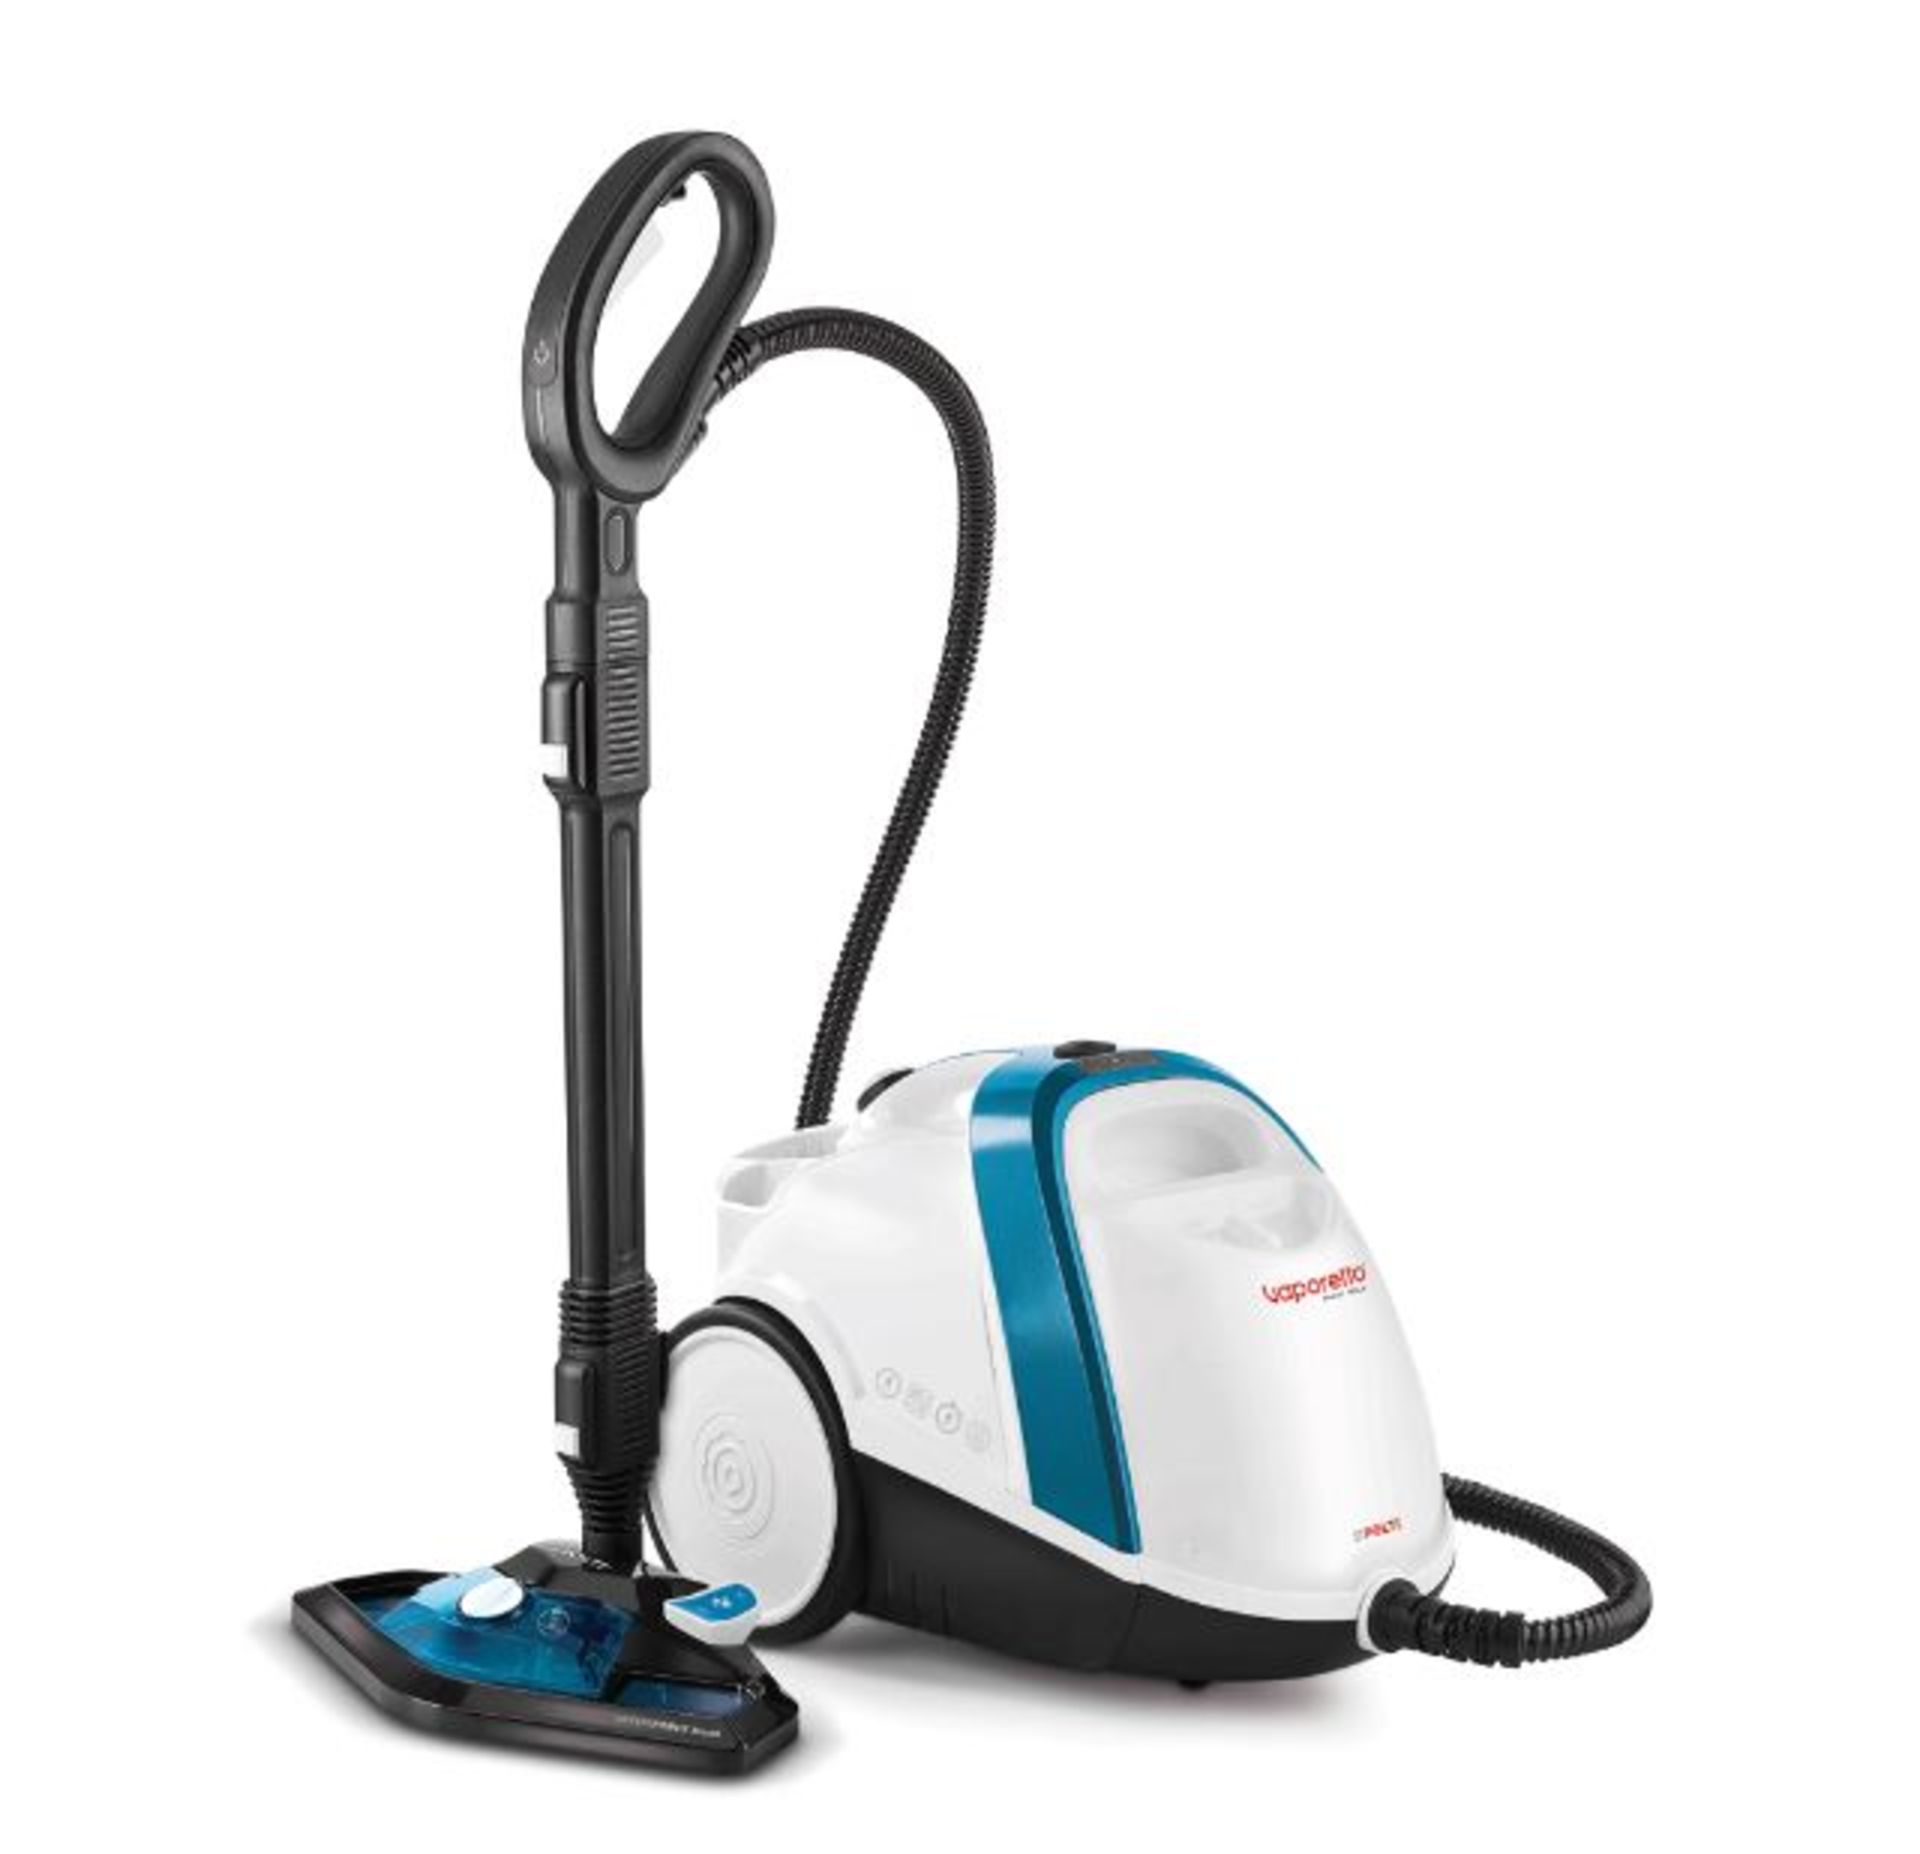 (R15I) Household. 1 X Politi Vaporetto Smart Hygienic Cleaning With Steam (New)